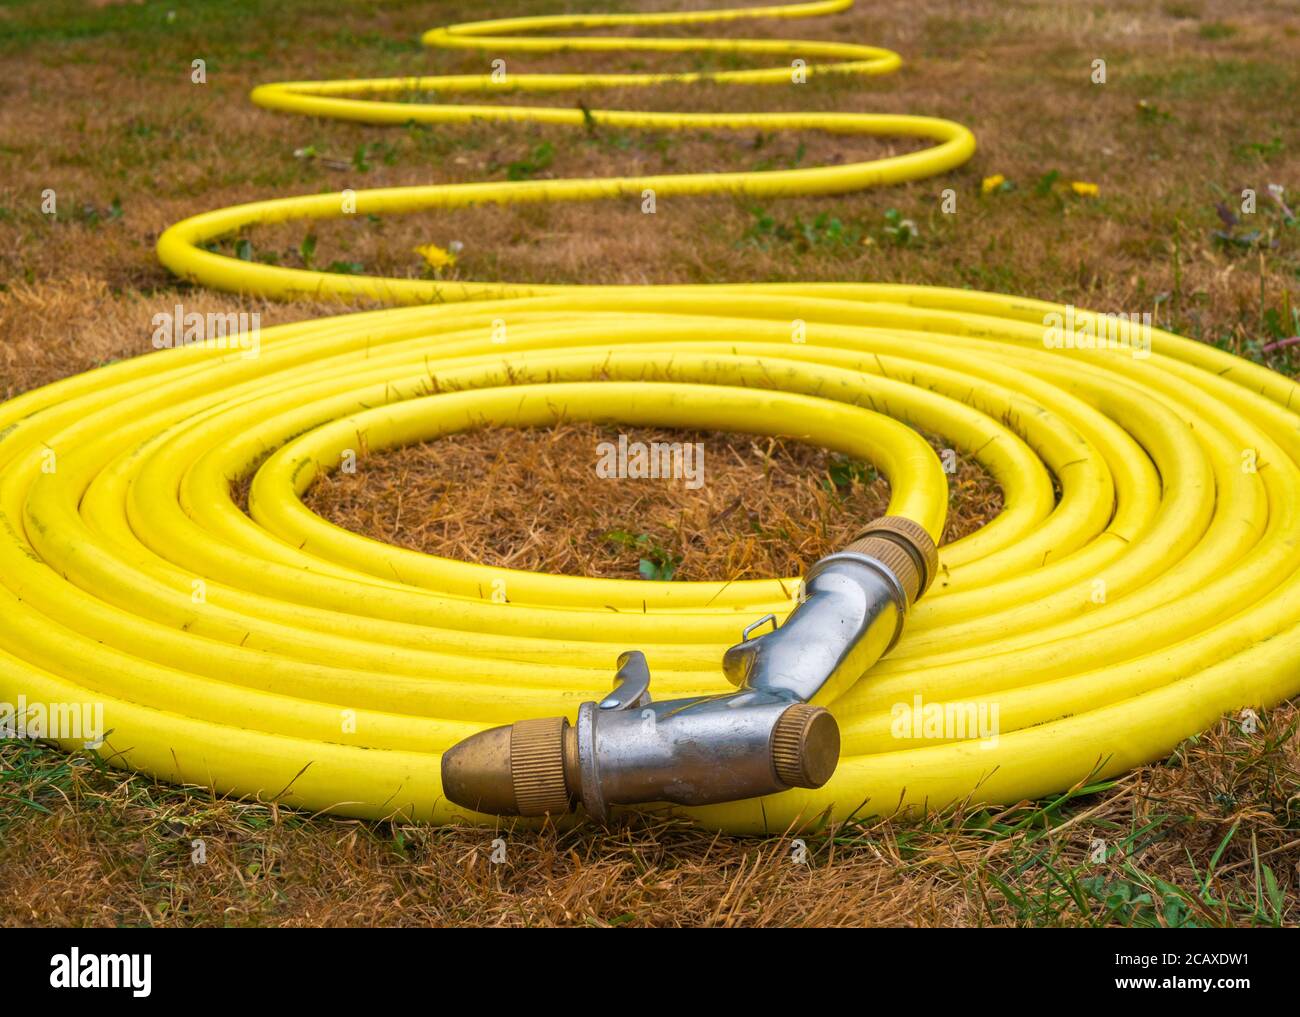 An unbranded yellow coiled water hose, with attached spray gun, on parched brown grass in an area where a water shortage has led to a hosepipe ban. Stock Photo